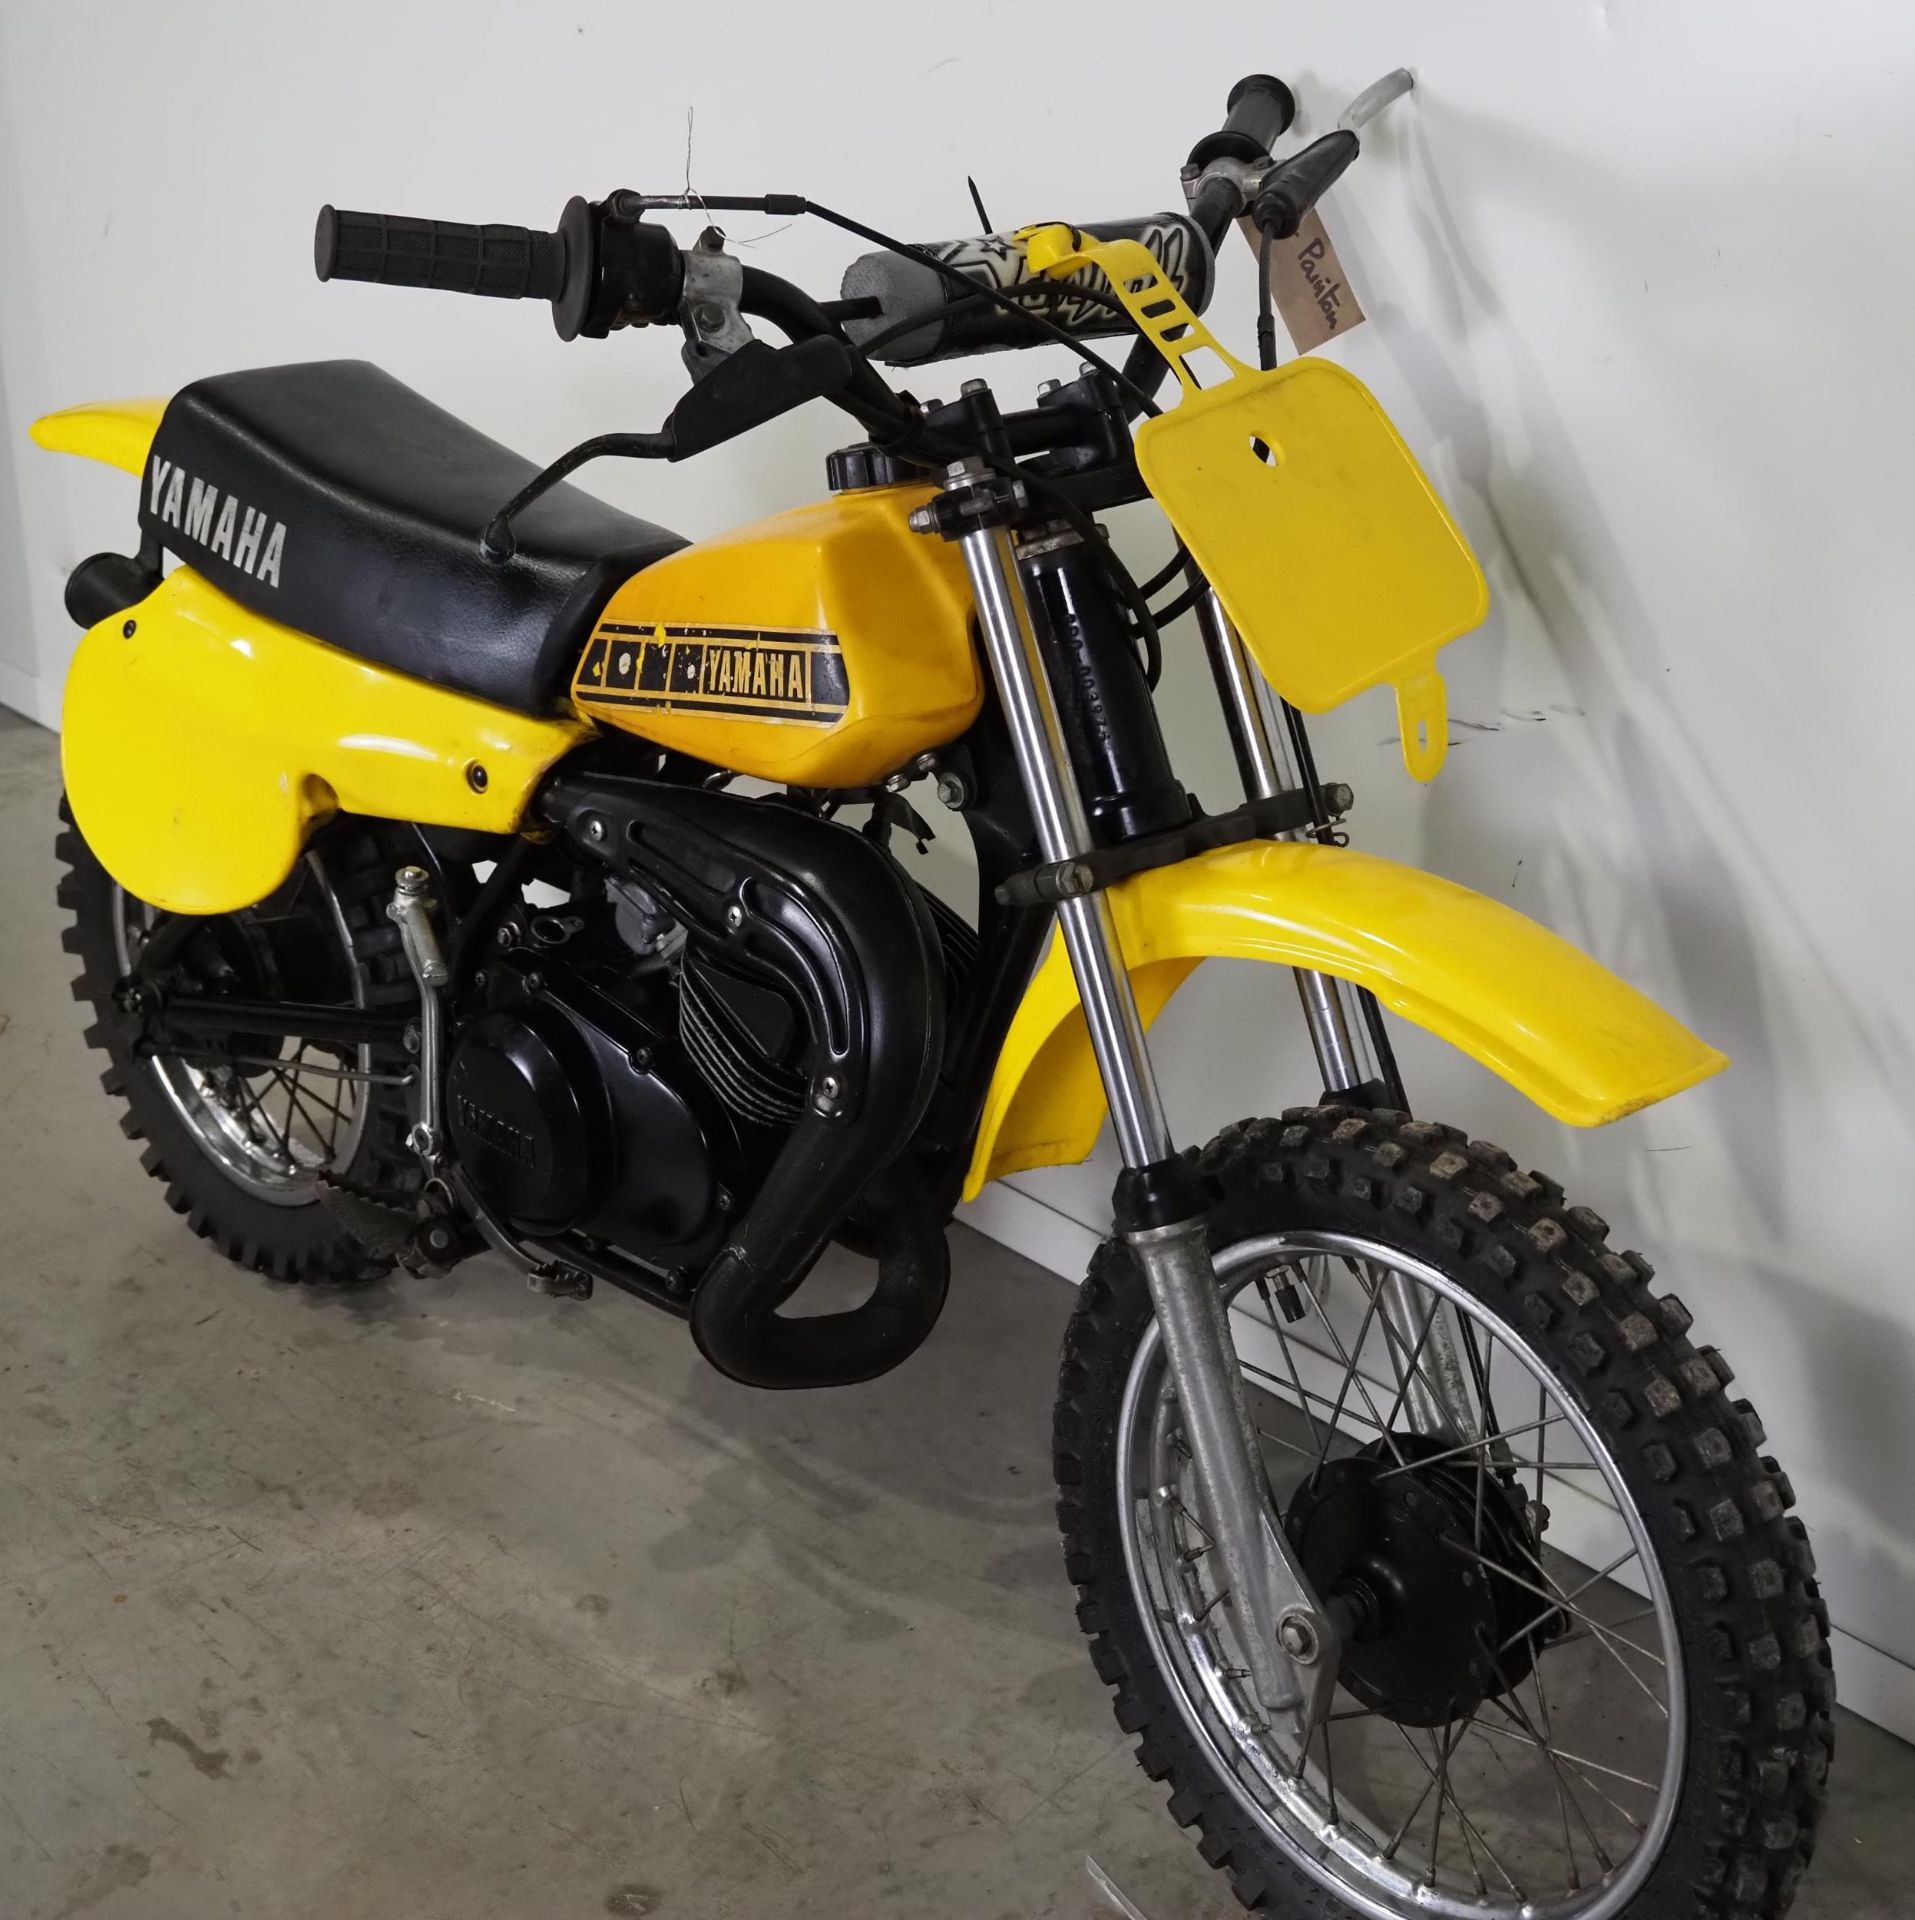 Yamaha YZ 50 motorcycle. Frame No- 3R0-003975 Runs and rides, came from a collection in Florida - Image 5 of 7